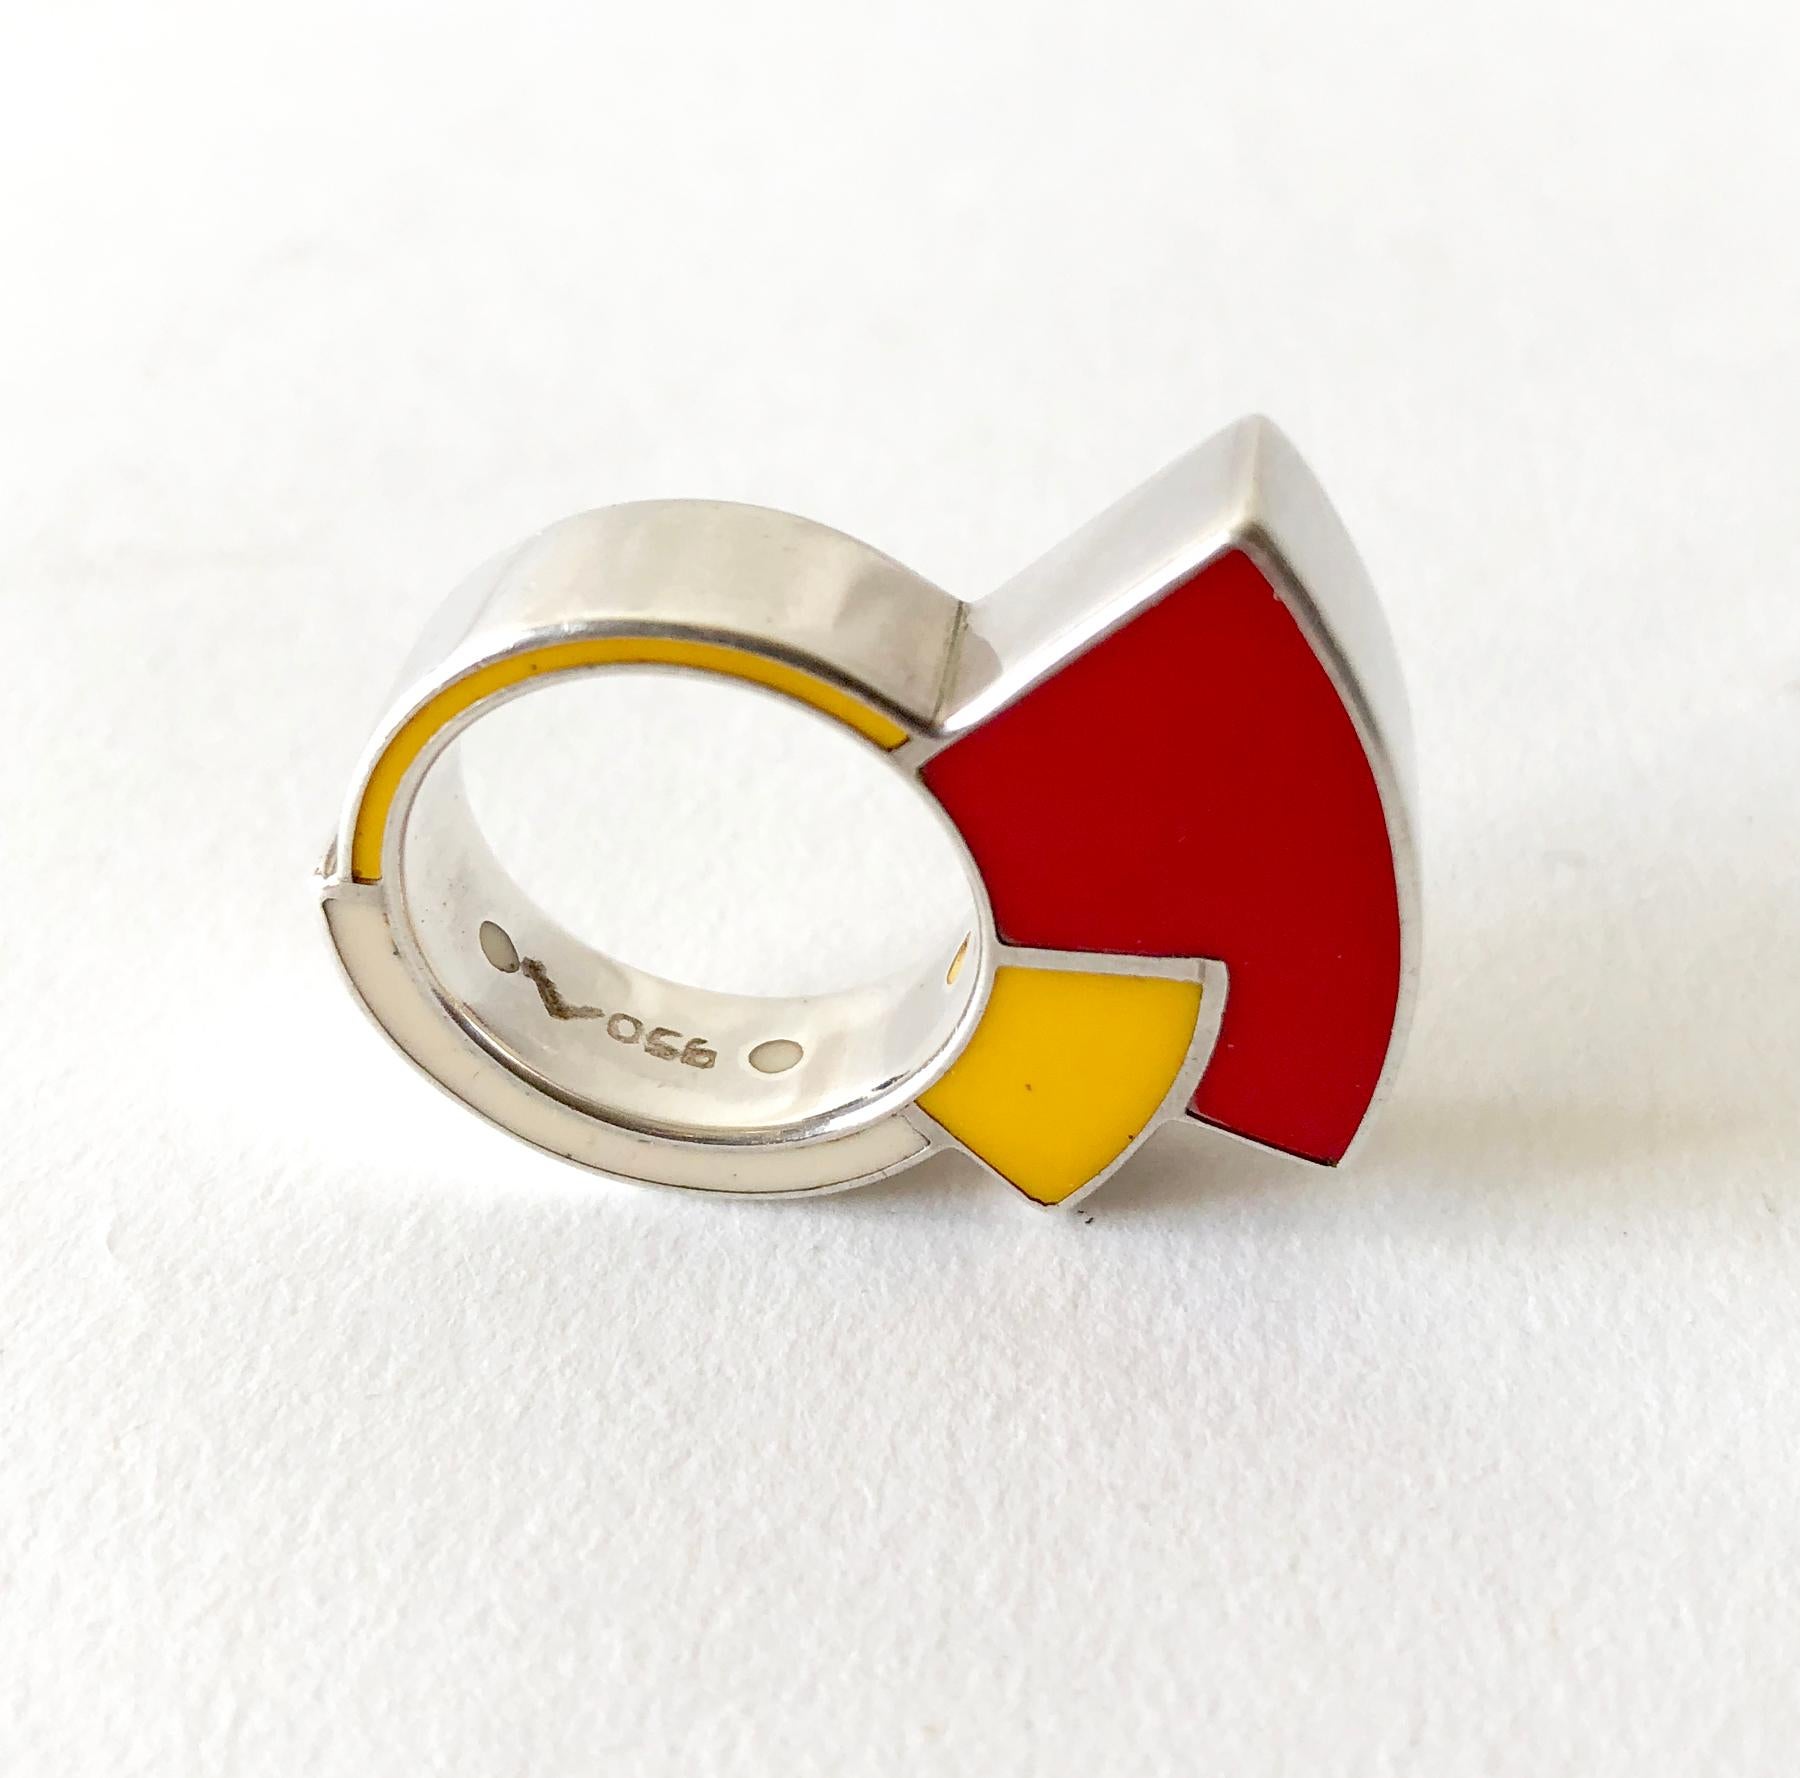 Post modern sterling silver and enamel ring, made in Italy circa 1980's.  Ring is a finger size 6.75 to 7.  It is signed 950 for sterling content with an artists mark of a stylized 